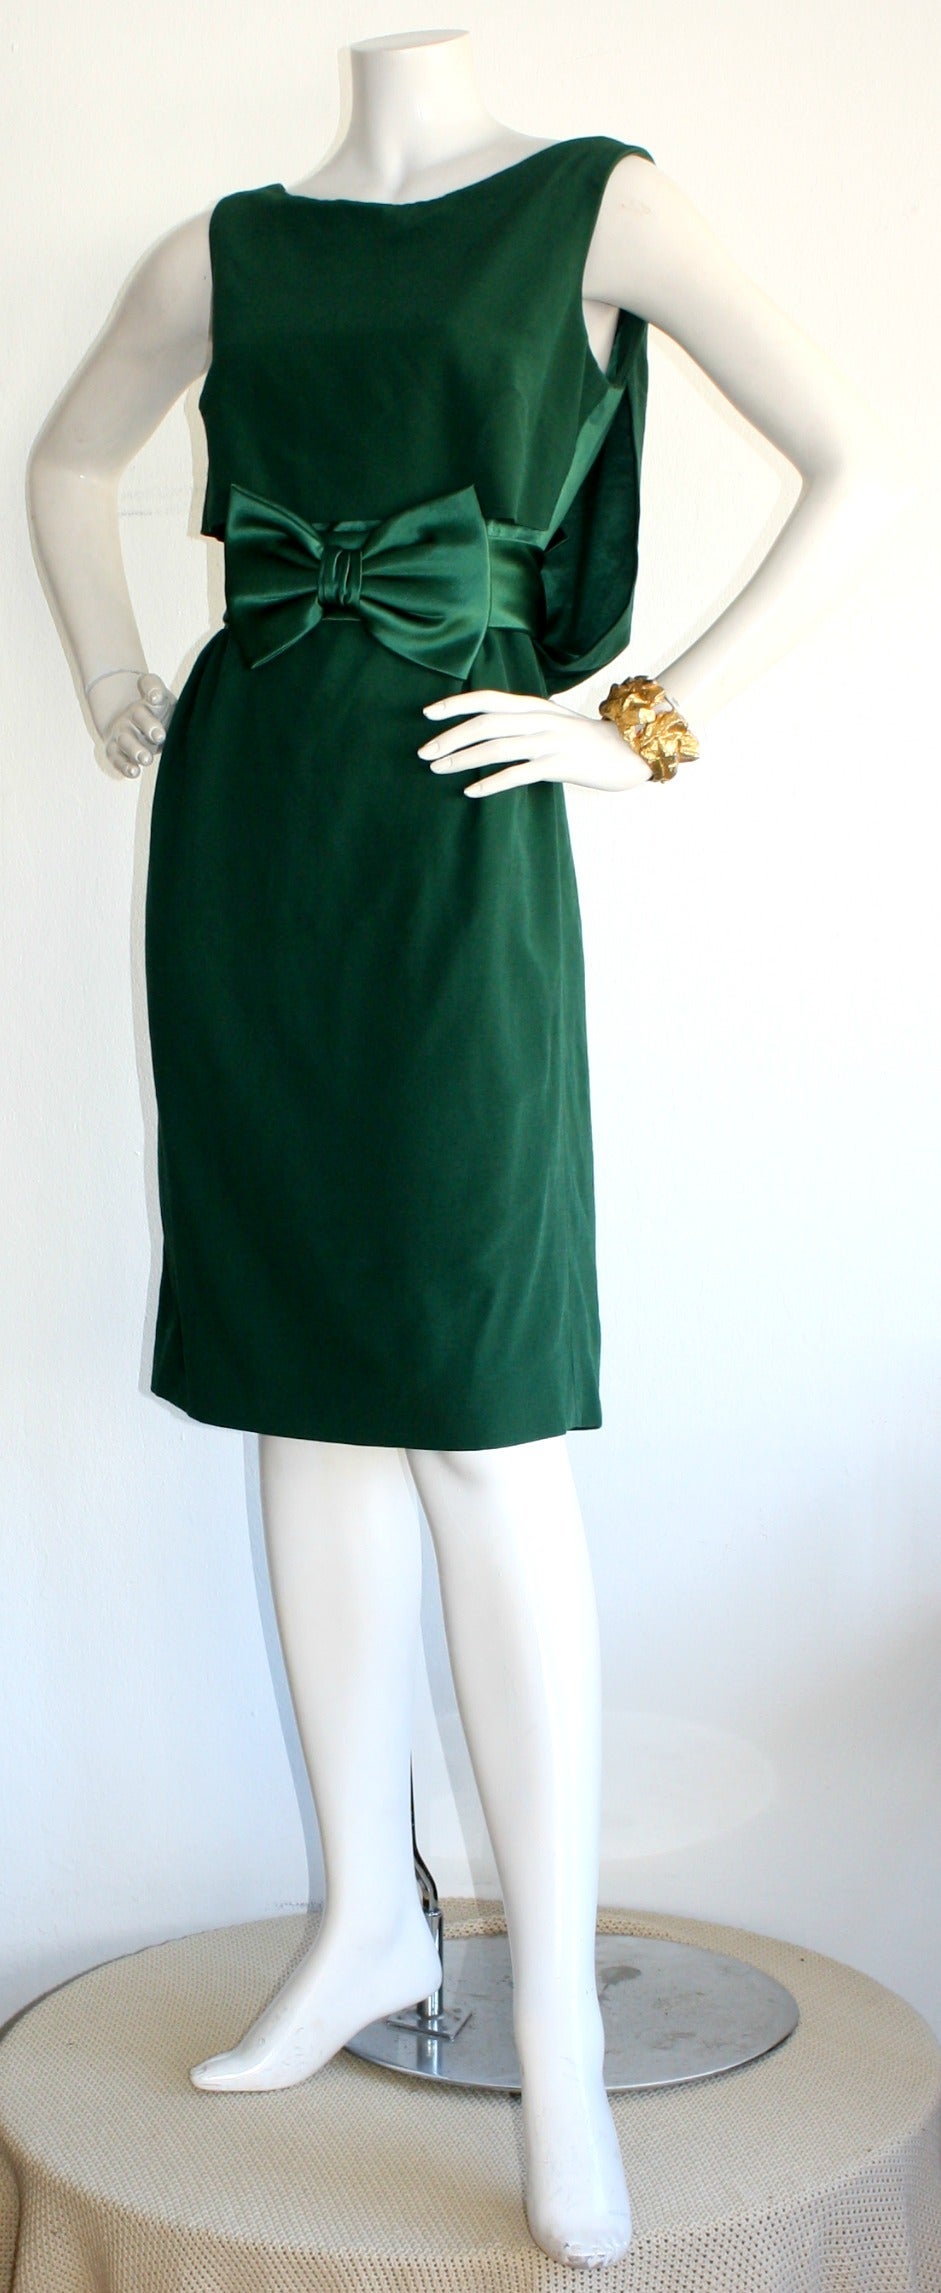 Gorgeous Paola Quadretti Haute Couture green silk dress, with detachable bow belt. Hand-Sewn. Retailed for $4,000. In great condition. Fully lined. Approximately Size Medium 

Measurements:
38 inch bust
30 inch bust
42 inch hips 
39 inches